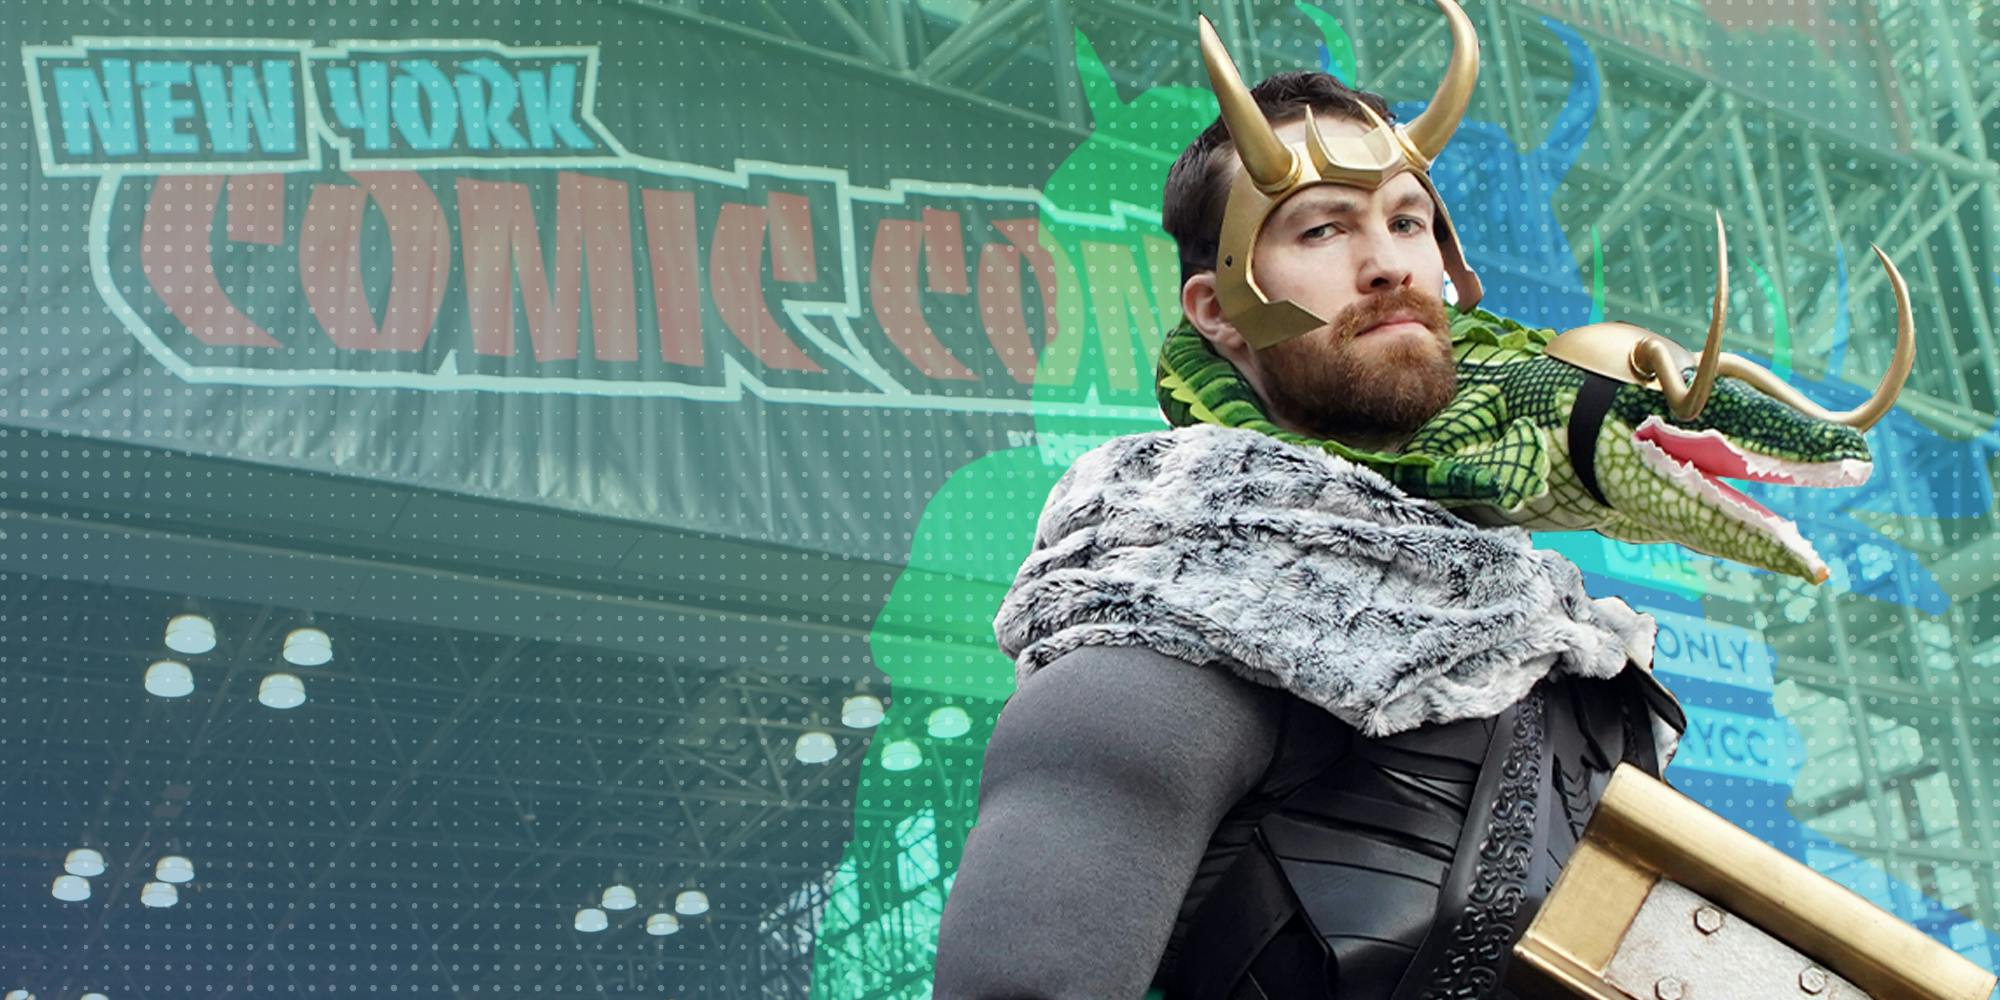 A fan cosplays as Loki at the 2023 New York Comic Con by Reed Pop at the Javits Center in Manhattan.